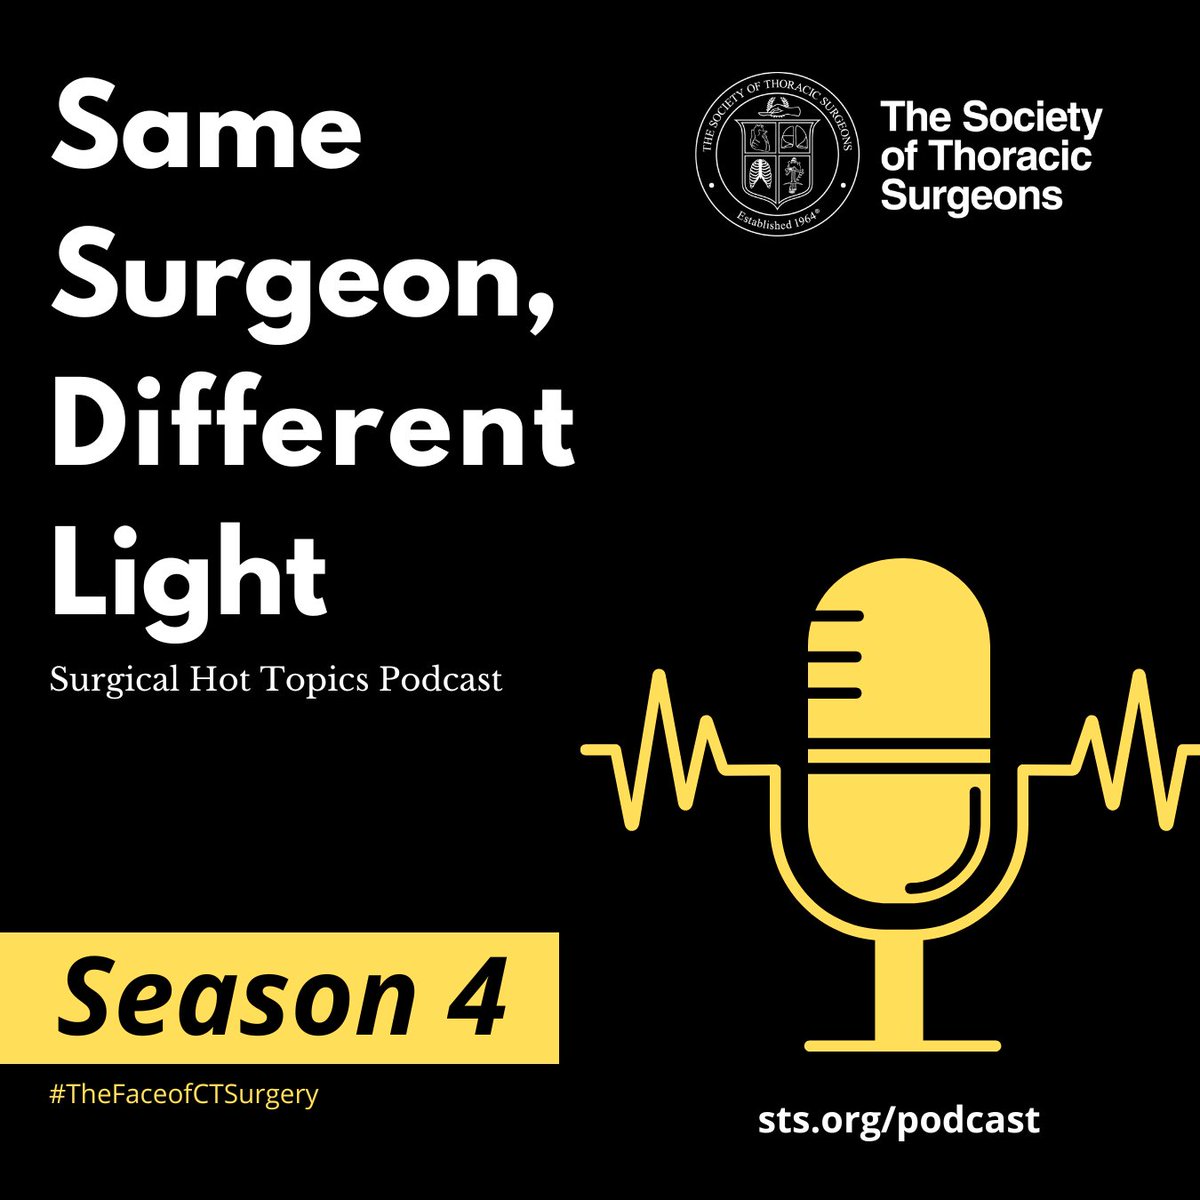 The new season of the Same Surgeon, Different Light podcast, hosted by @DavidCookeMD and @TomVargheseJr, is here! In this episode, @A_MartinMD and Dr. Lillian Tsai talk about their career journeys and the people who have positively influenced them. #DEI bit.ly/43LrgYL